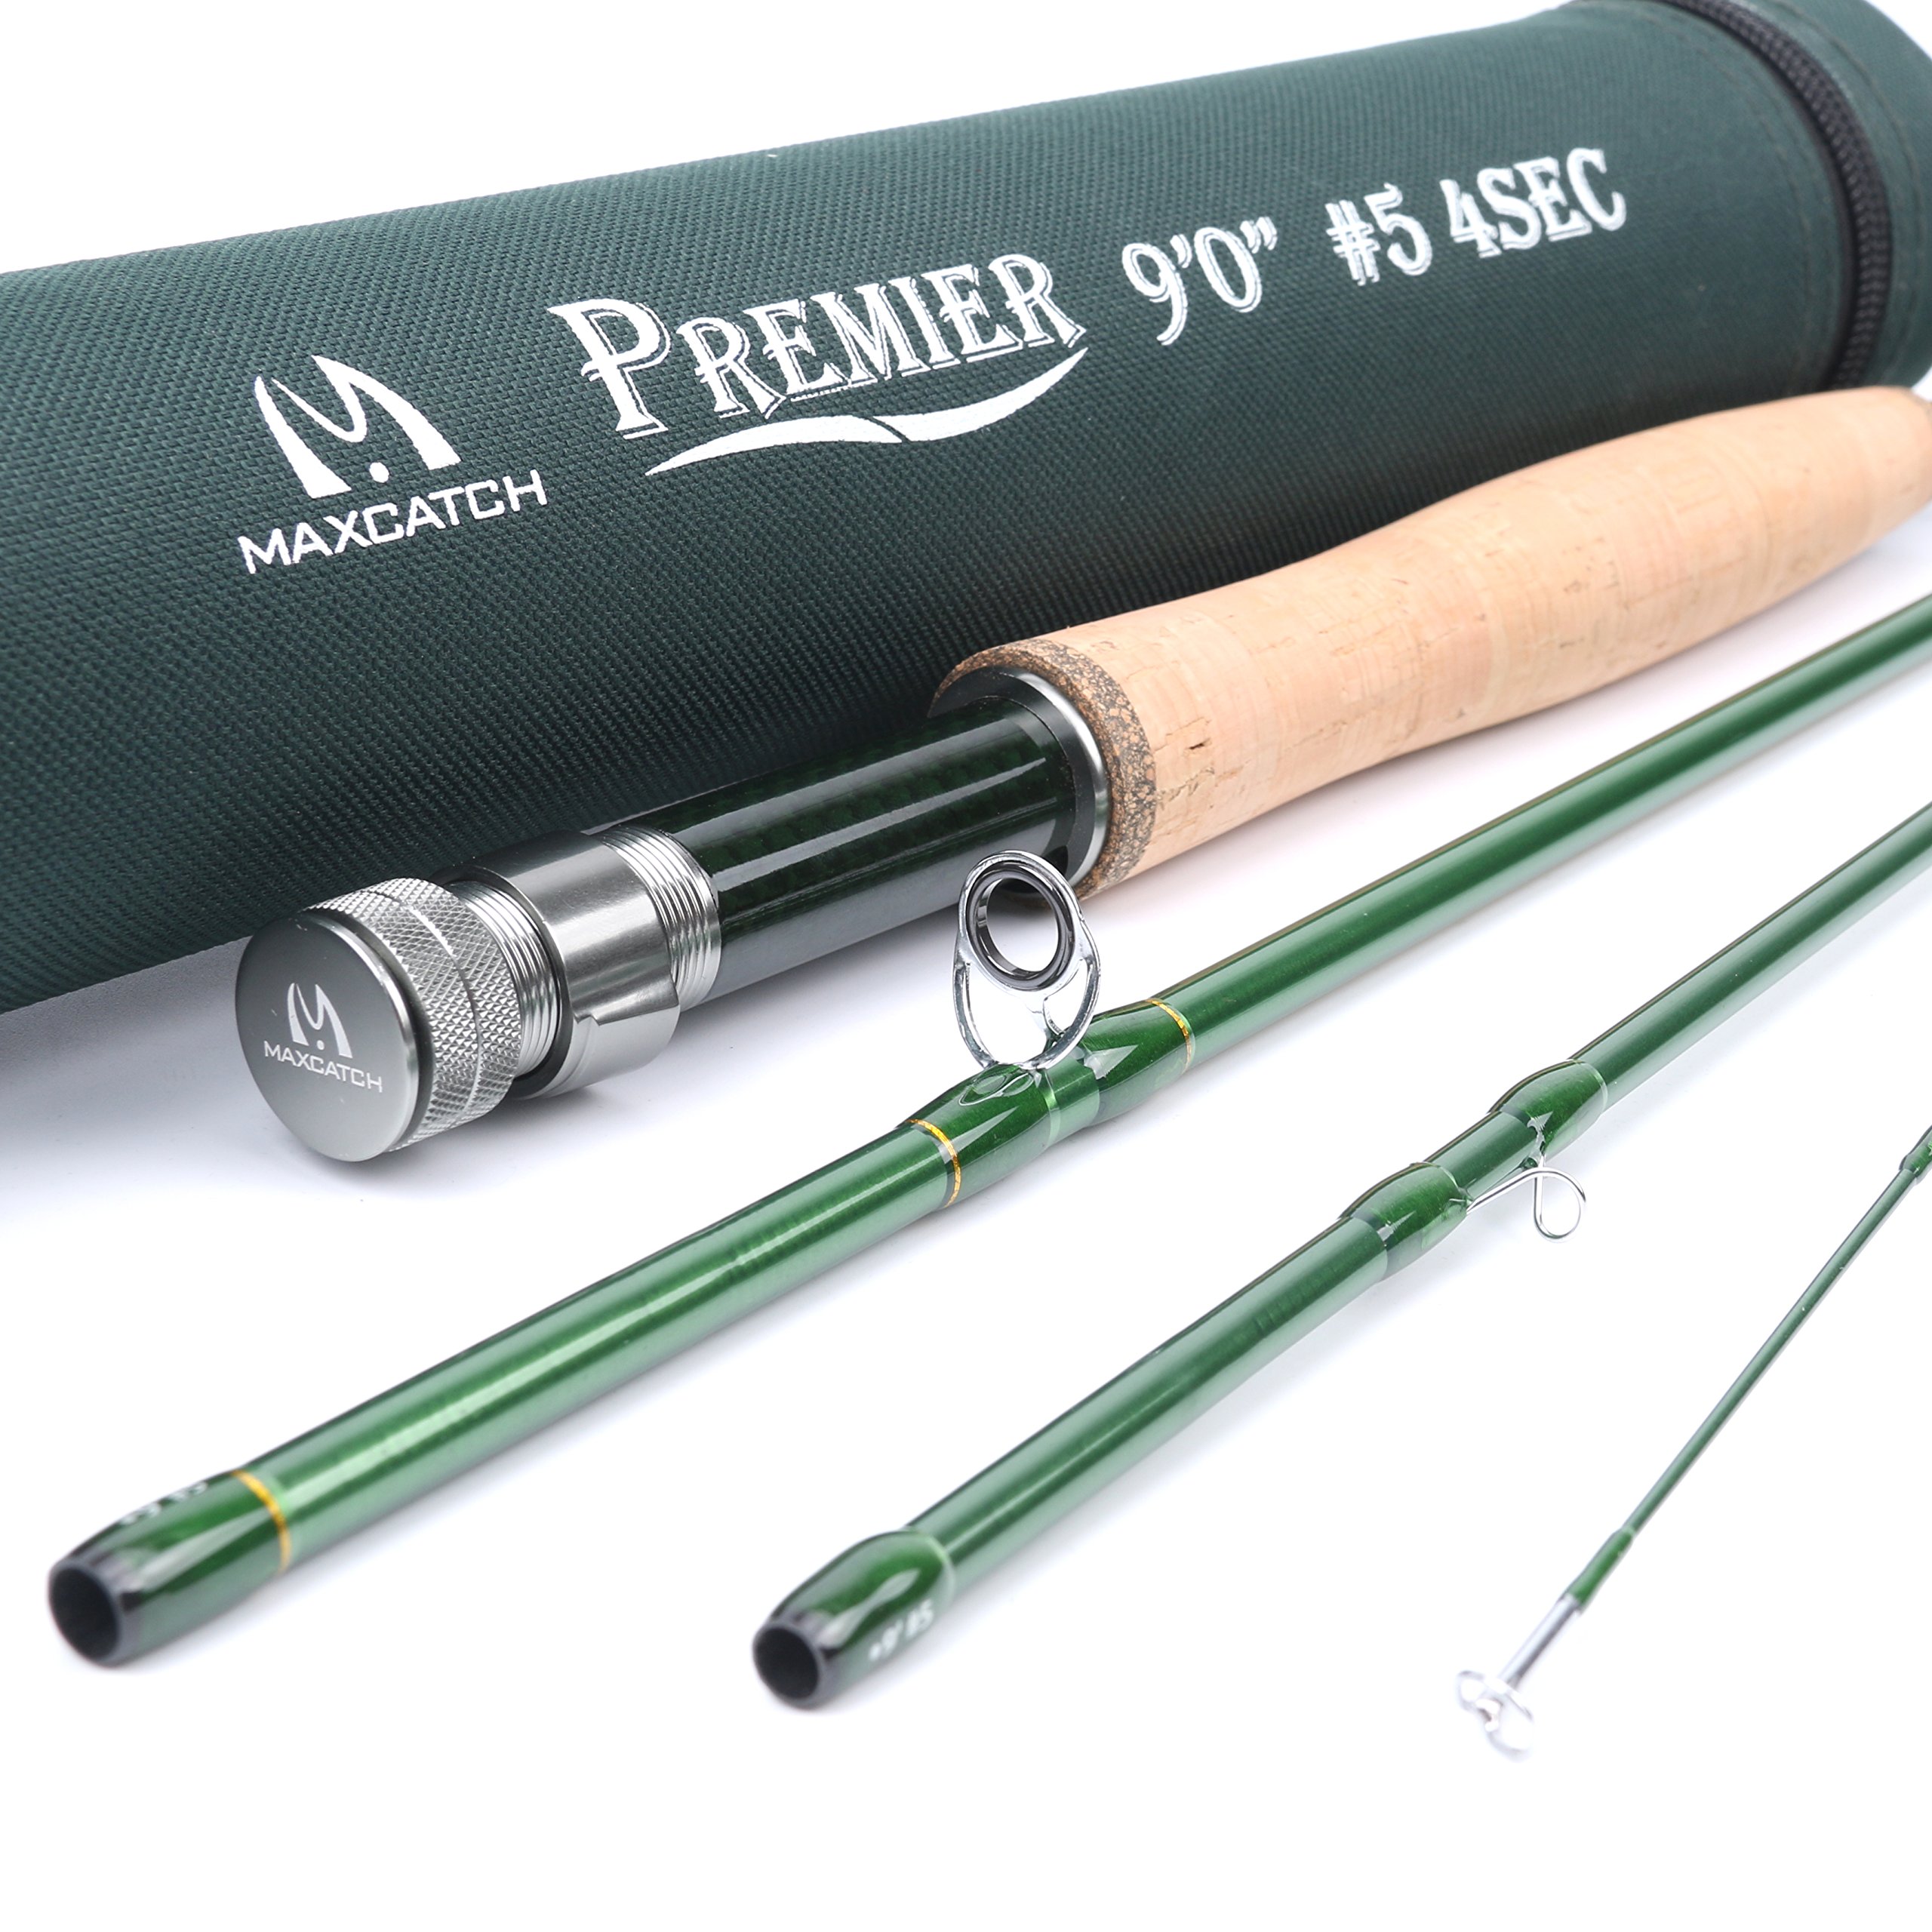 Maxcatch 3-12wt Medium-Fast Action Premier Fly Fishing Rod-IM8 Carbon Blank  for High Performance